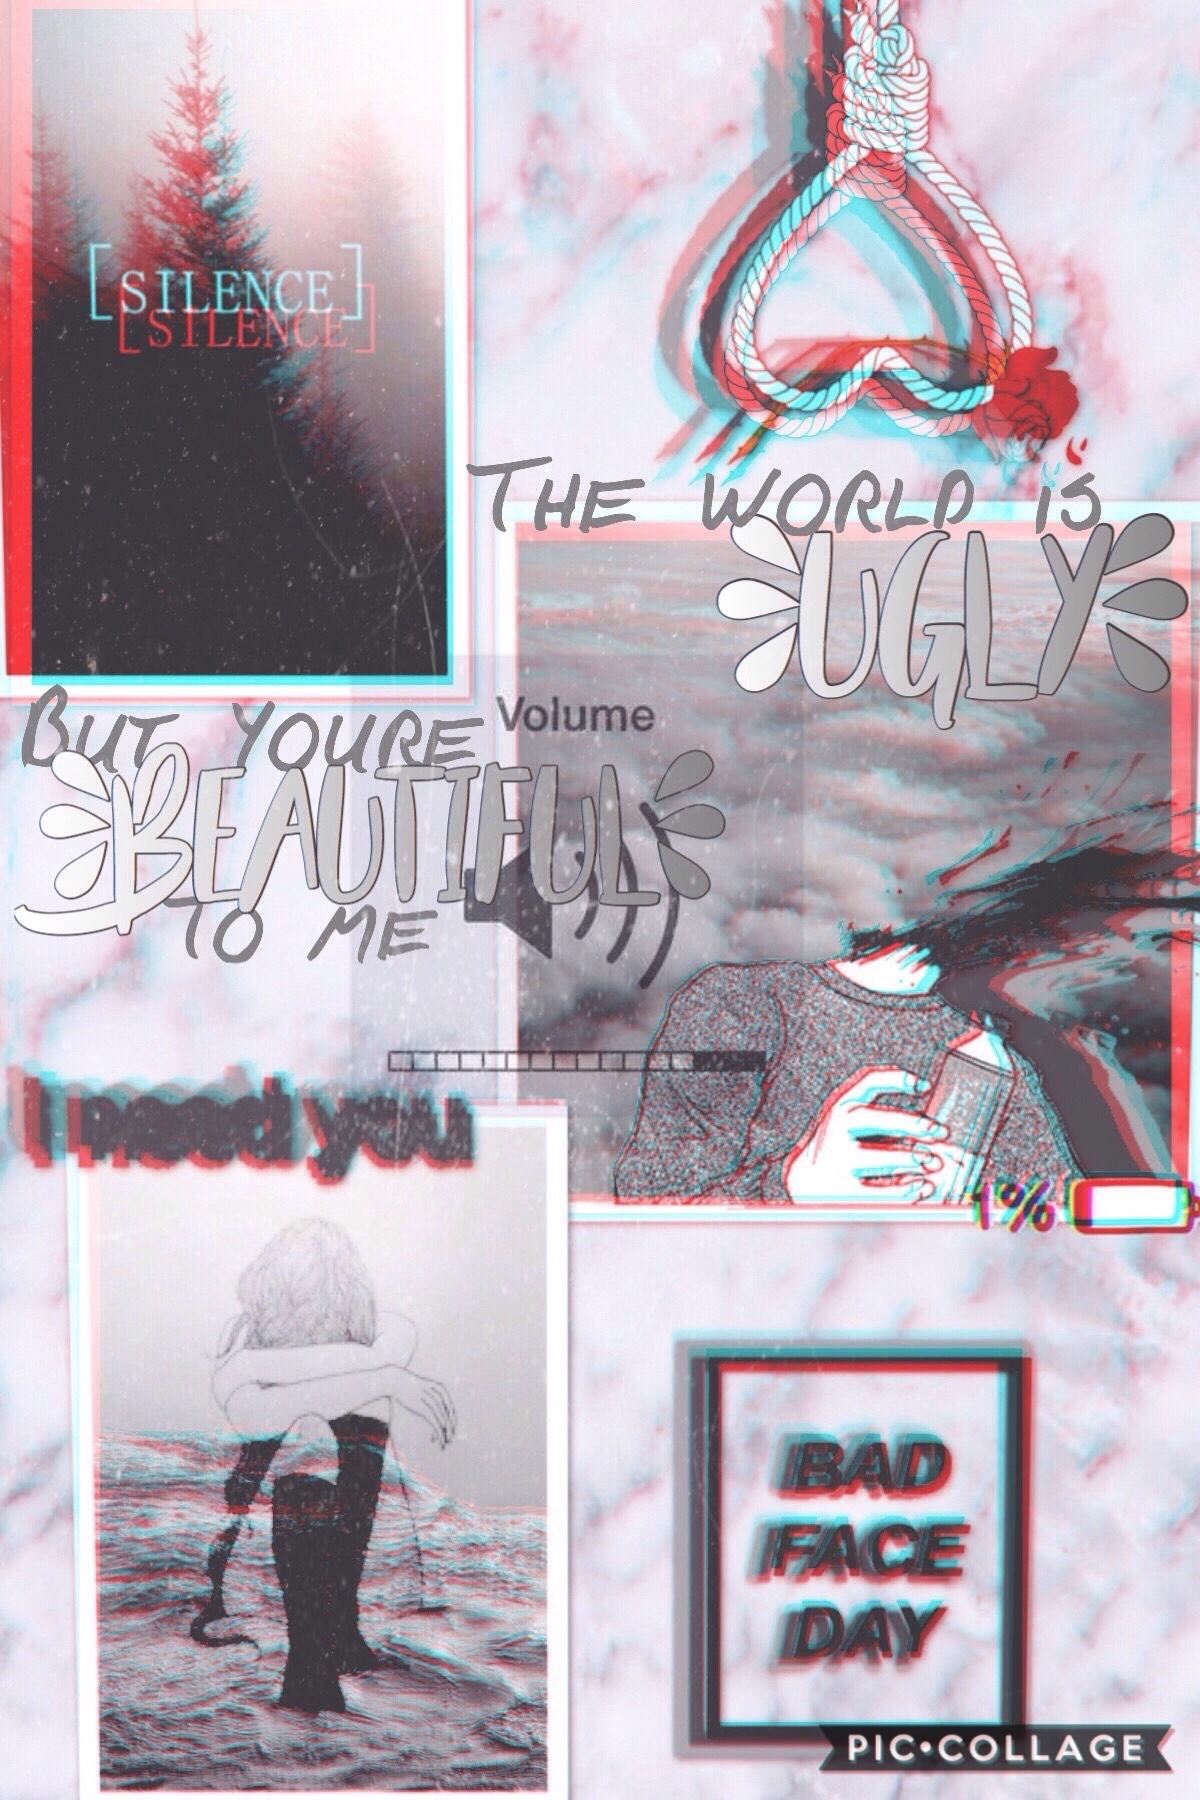 Sorry this sucks lol 🥀🖤
The world is ugly- My Chemical Romance 